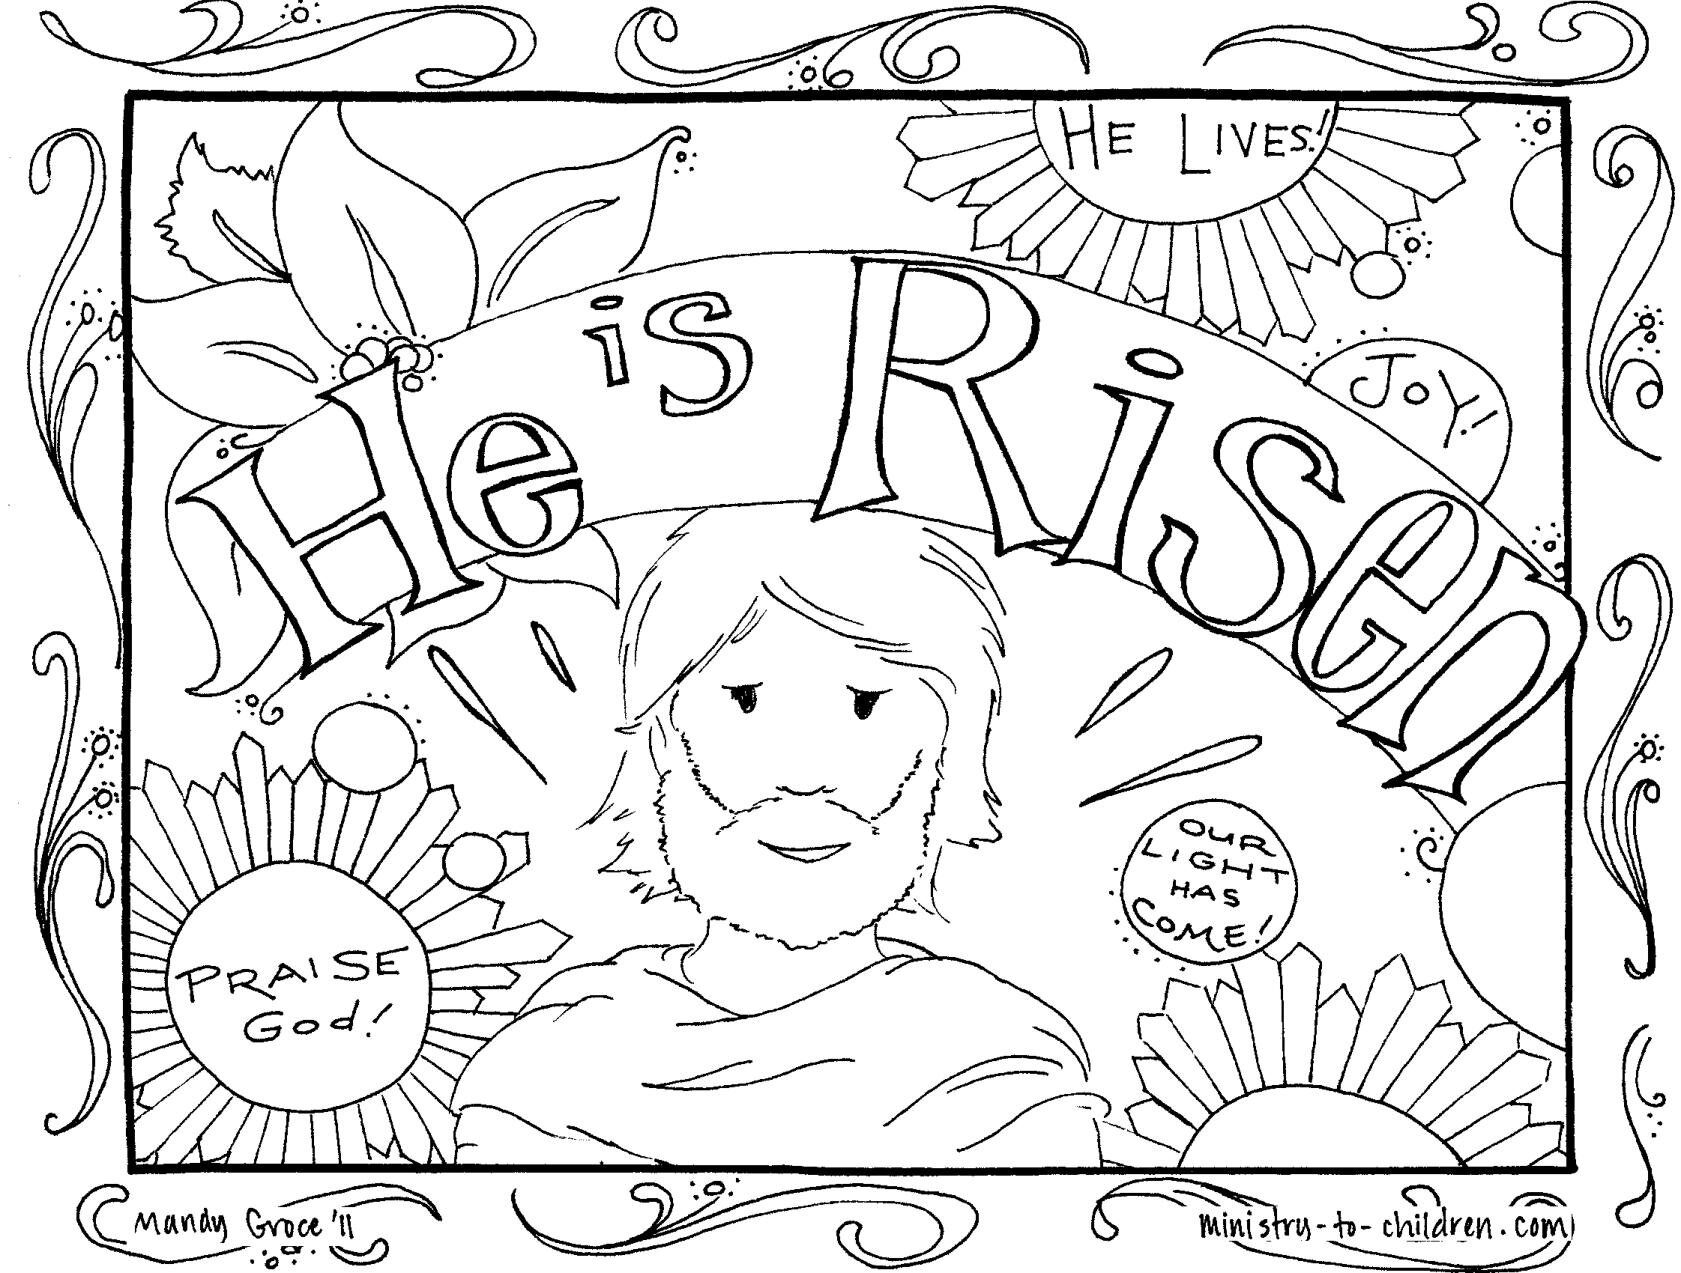 He Is Risen Coloring Sheet-page-001.jpg